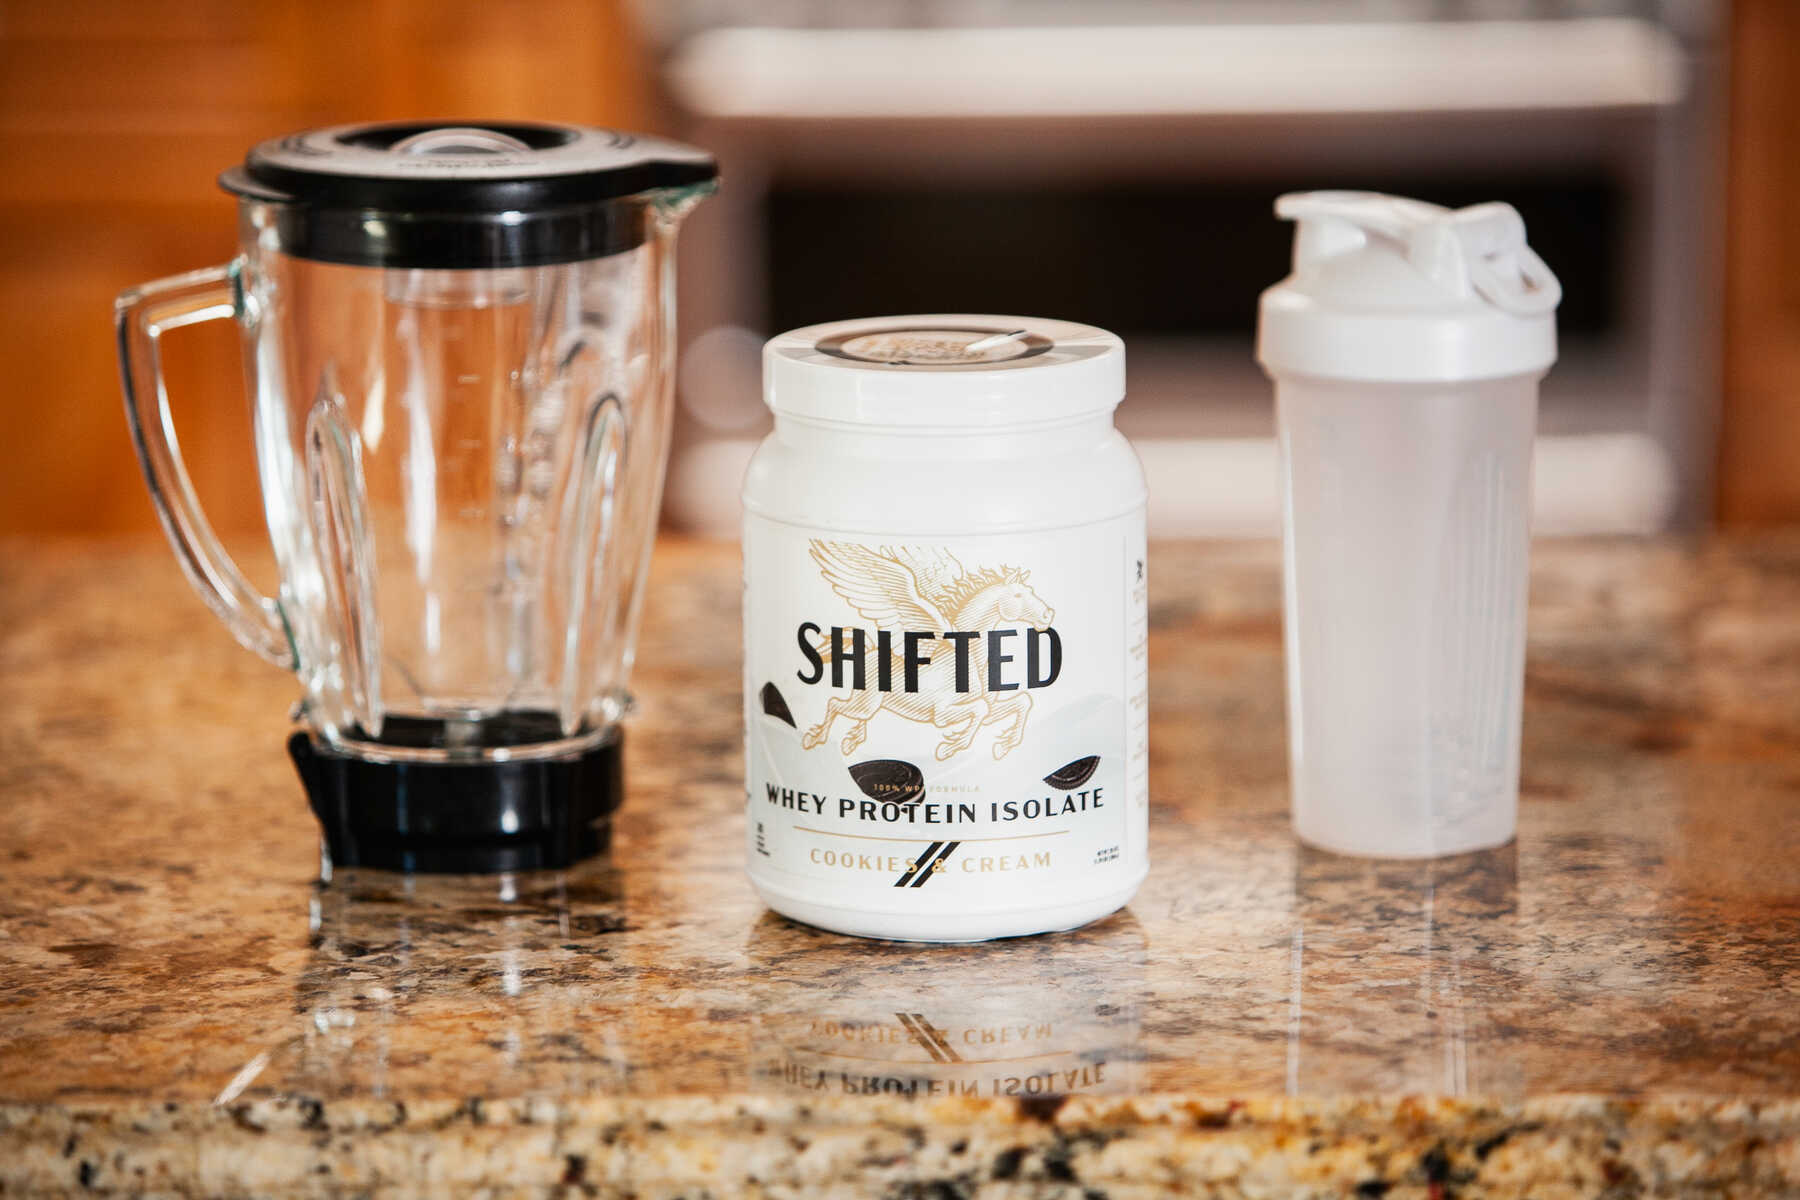 Shifted Whey Protein Isolate powder beside a blender and an empty water bottle